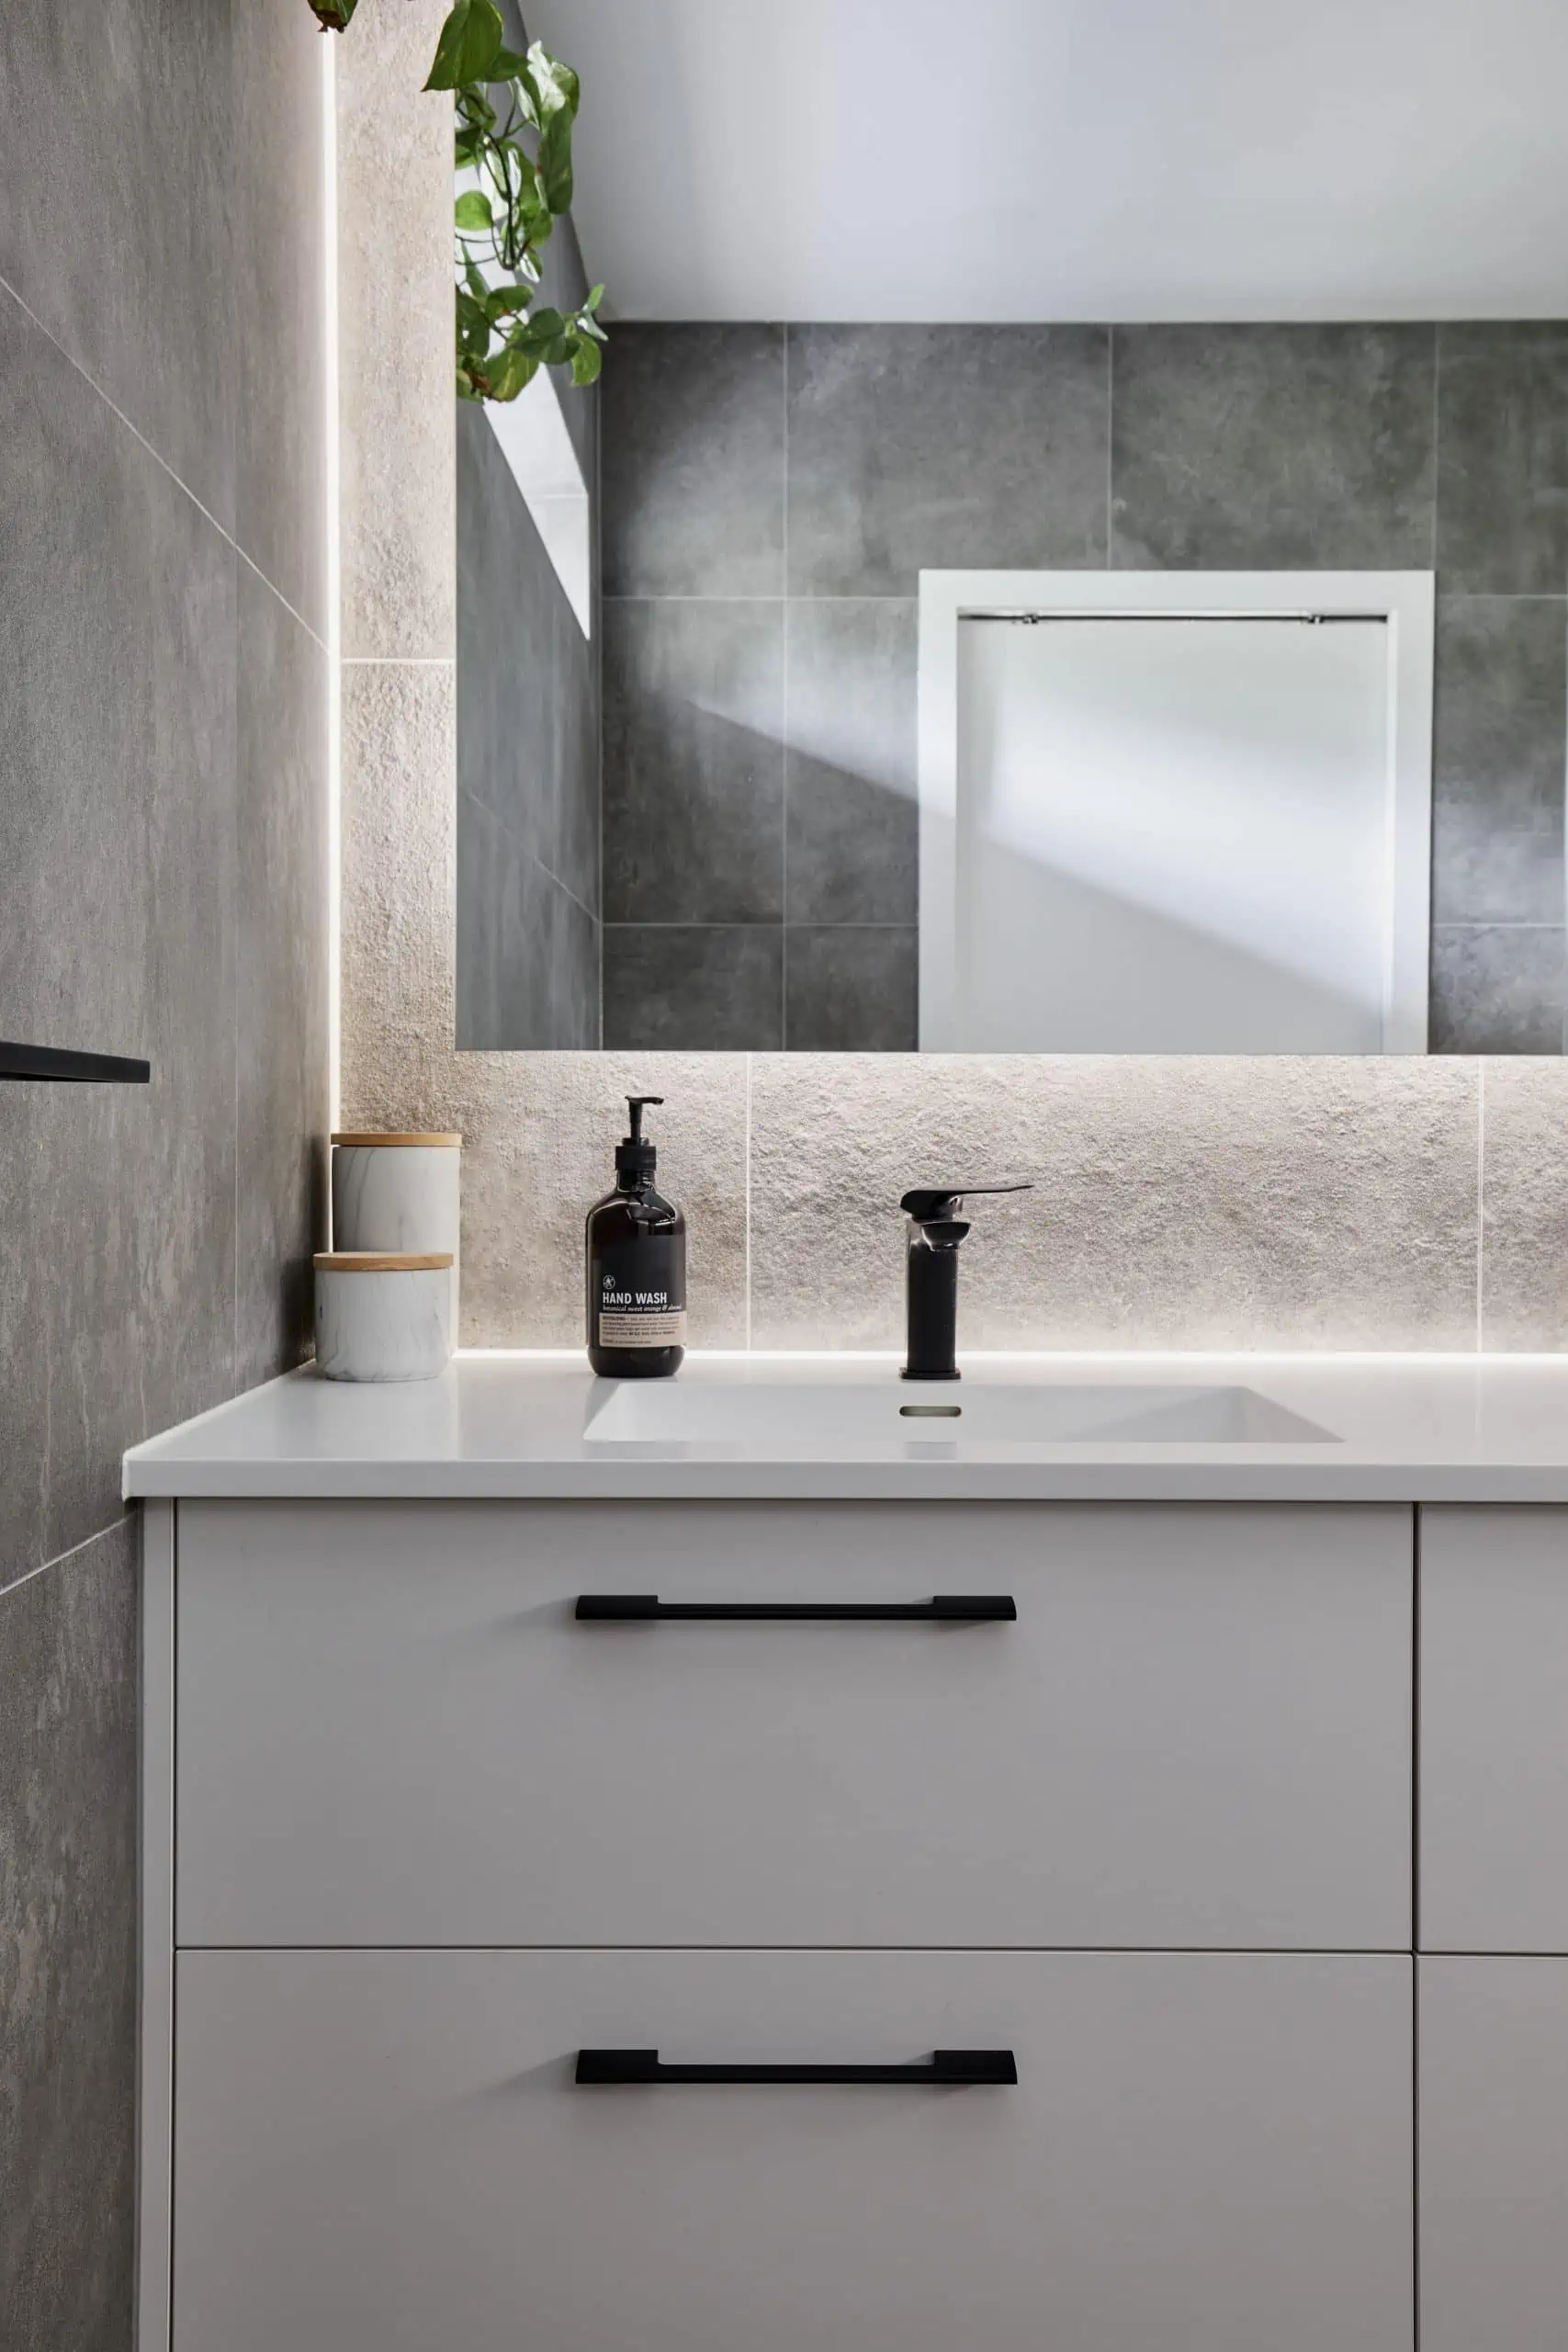 Natural wall tiles and white modern aesthetic in a bathroom photograph